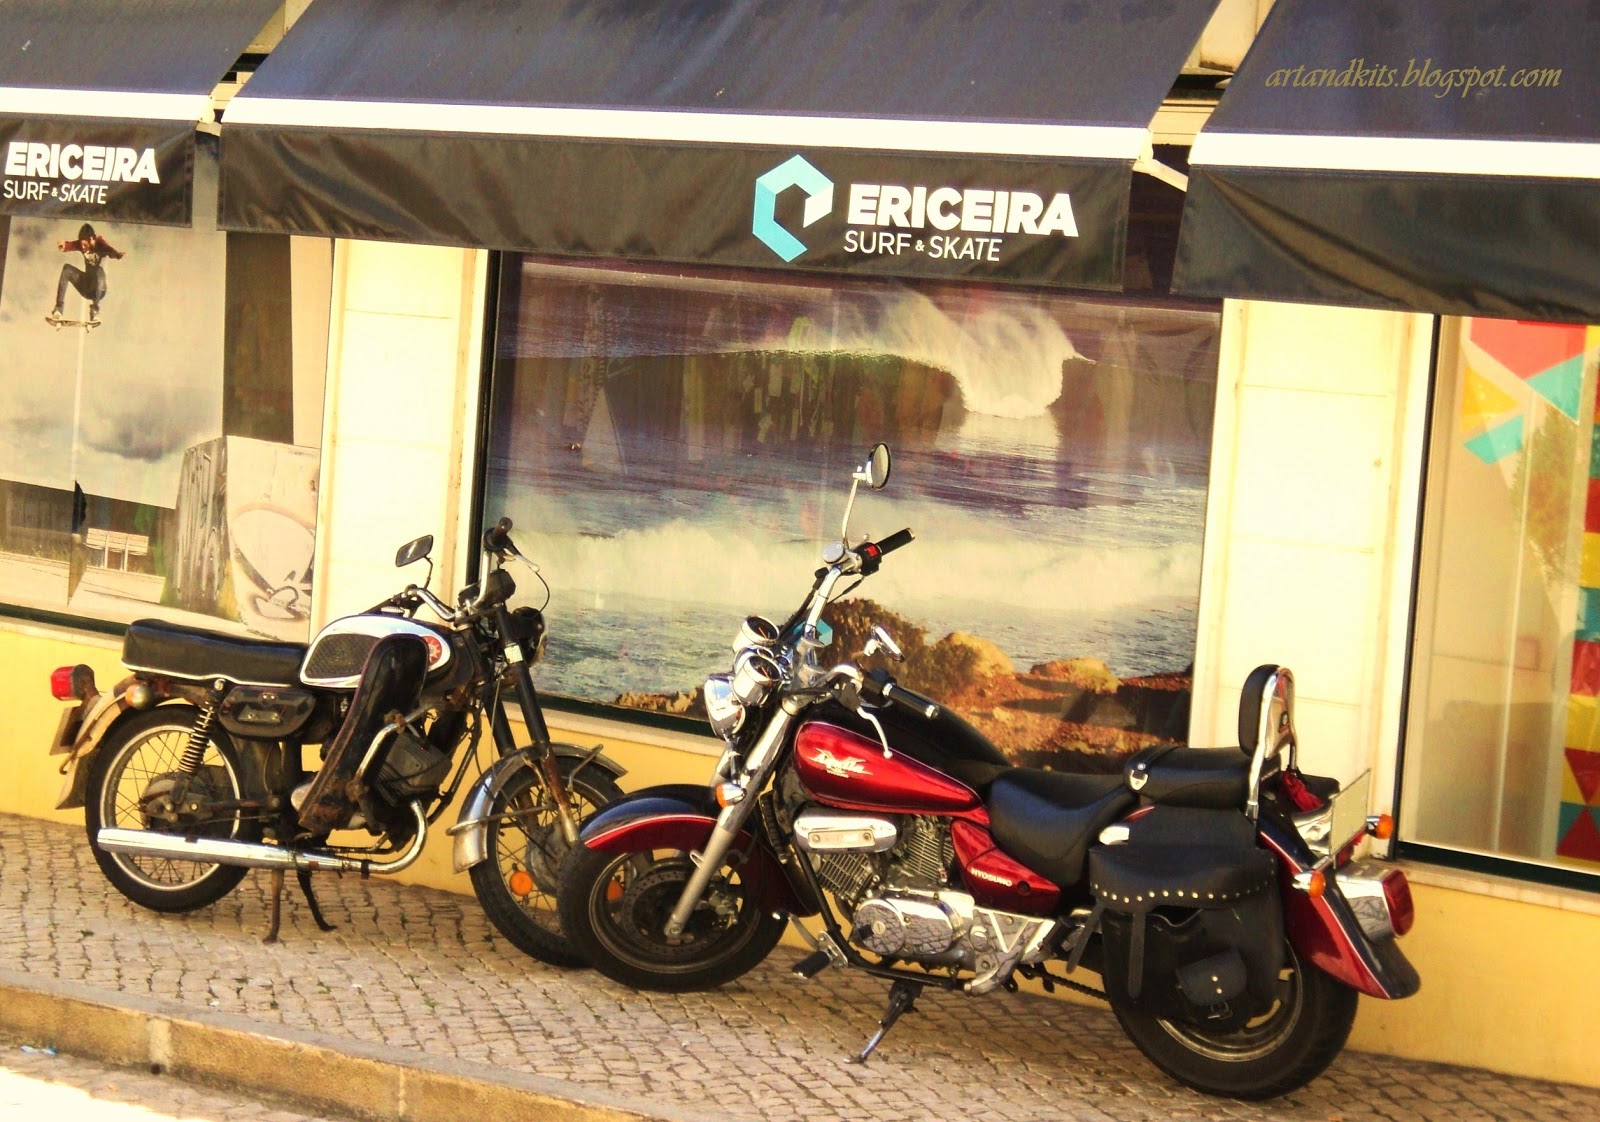 Não me ocorrendo muito para dizer sobre esta foto, tirada na zona comercial, mesmo no centro da Ericeira... resta-me associá-la à única música, que sempre me vem à mente... quando o tema é motas... vejam o link no post... / Not occurring me much to say about this photo, taken in the commercial area, right in the center of Ericeira... I have nothing left but associate it with the only song that always comes to my mind, when the topic is... motorbikes... see the link on the post...